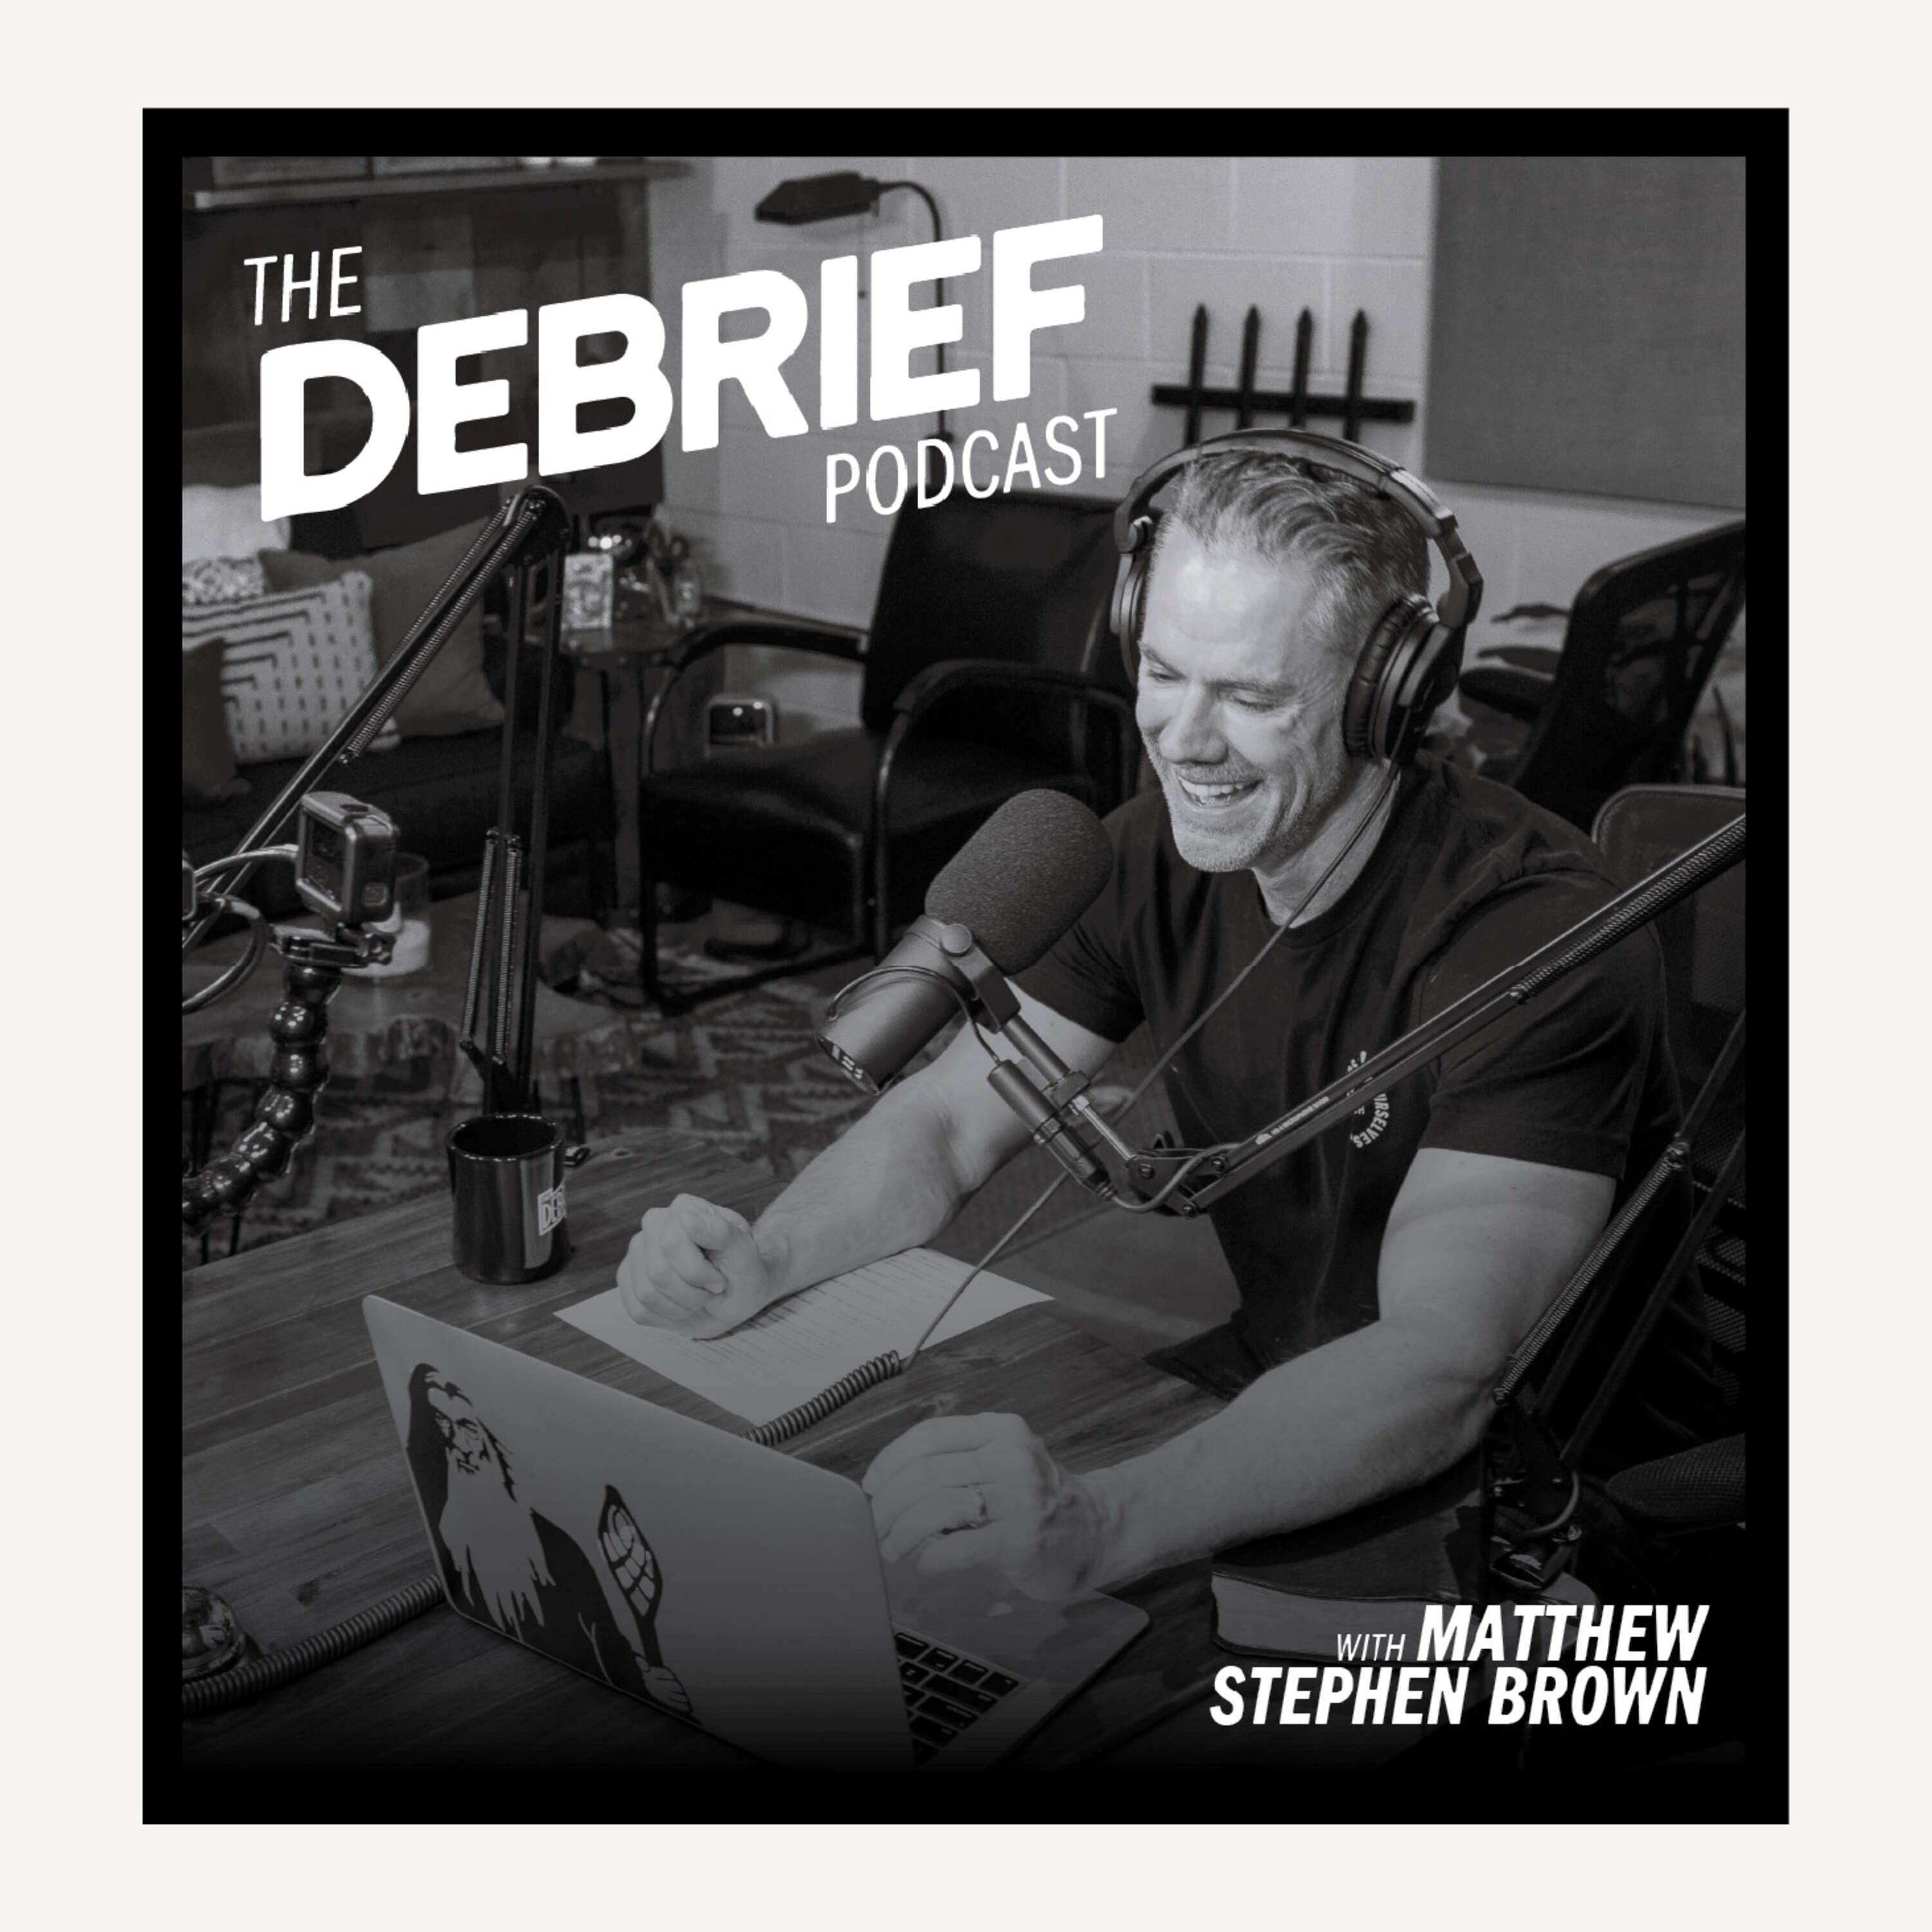 The Debrief Podcast with Matthew Stephen Brown